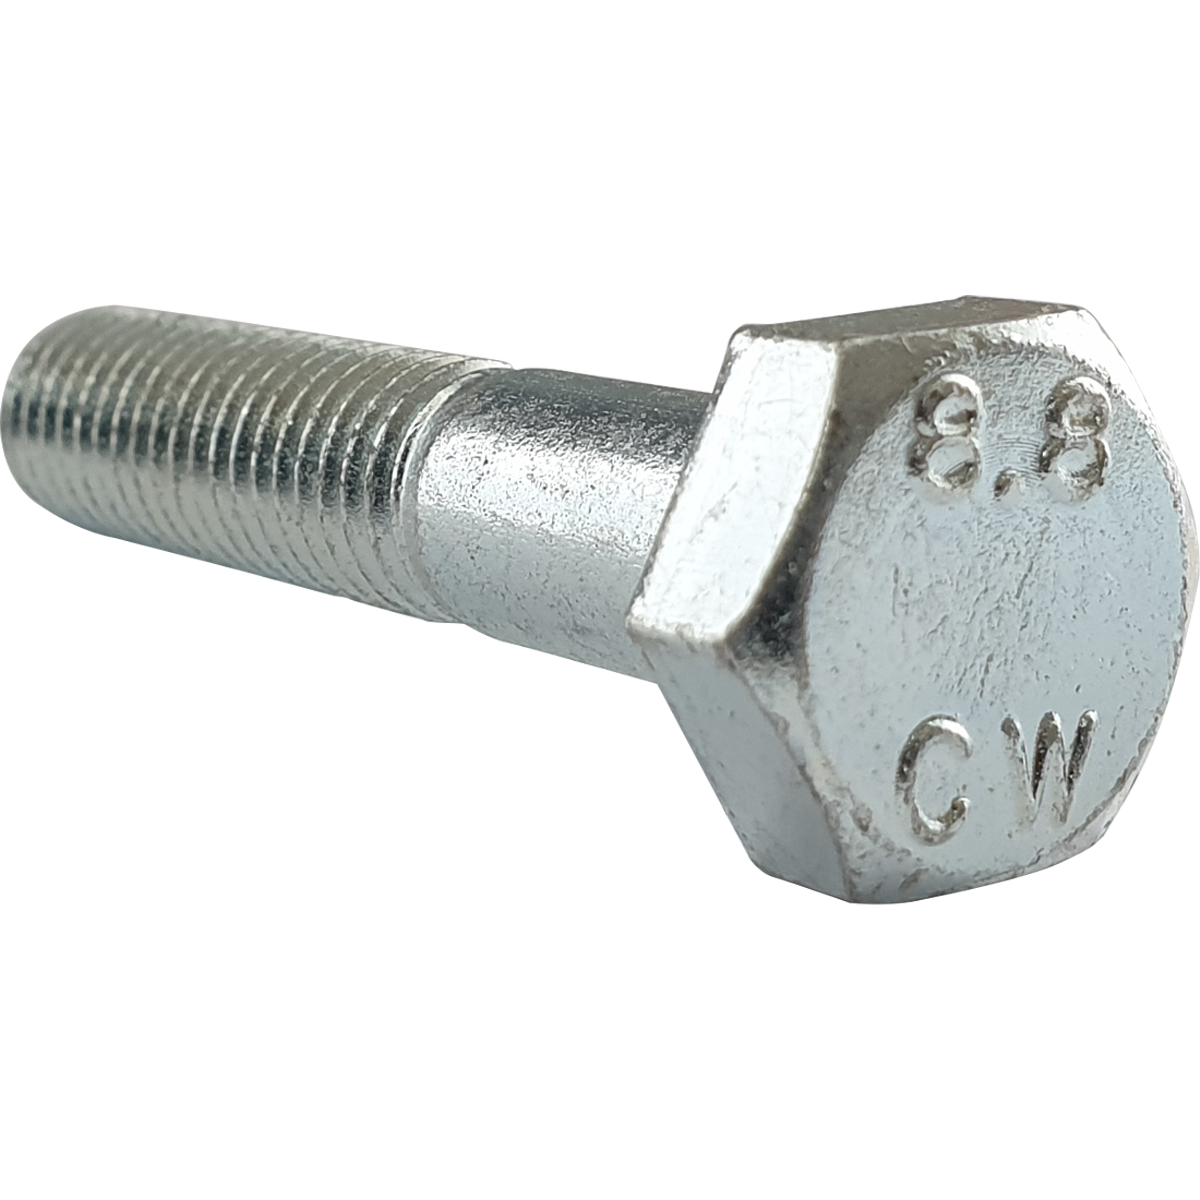 A zinc plated, part thread hex bolts with a hexagonal head. Also known as hexagon bolts, at competitive prices.